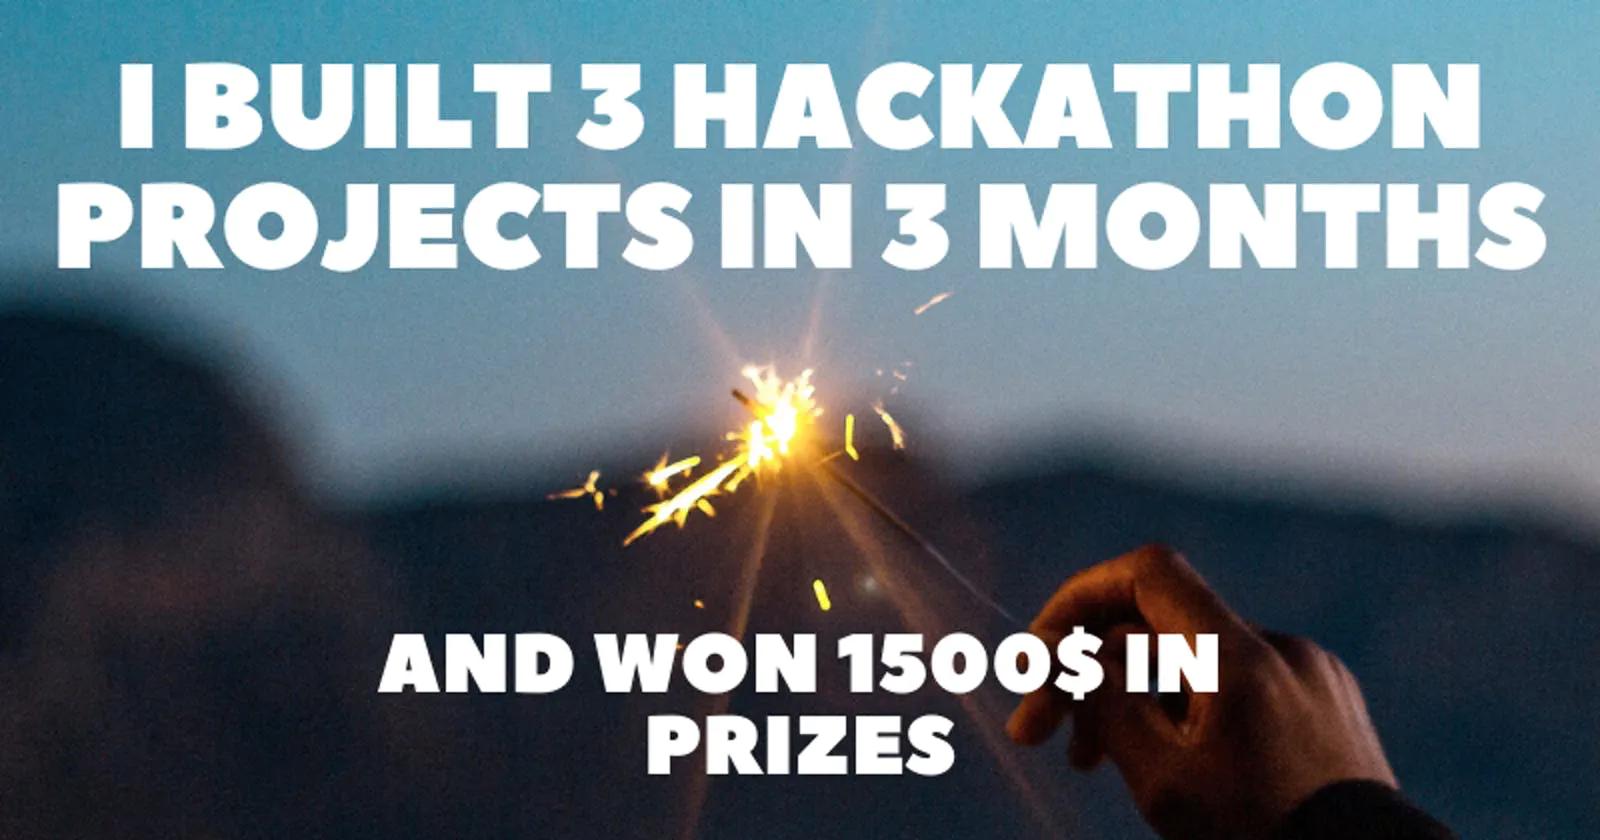 I built 3 Hackathon projects in 3 months, and won 1500$ in Prizes 🥳🎉